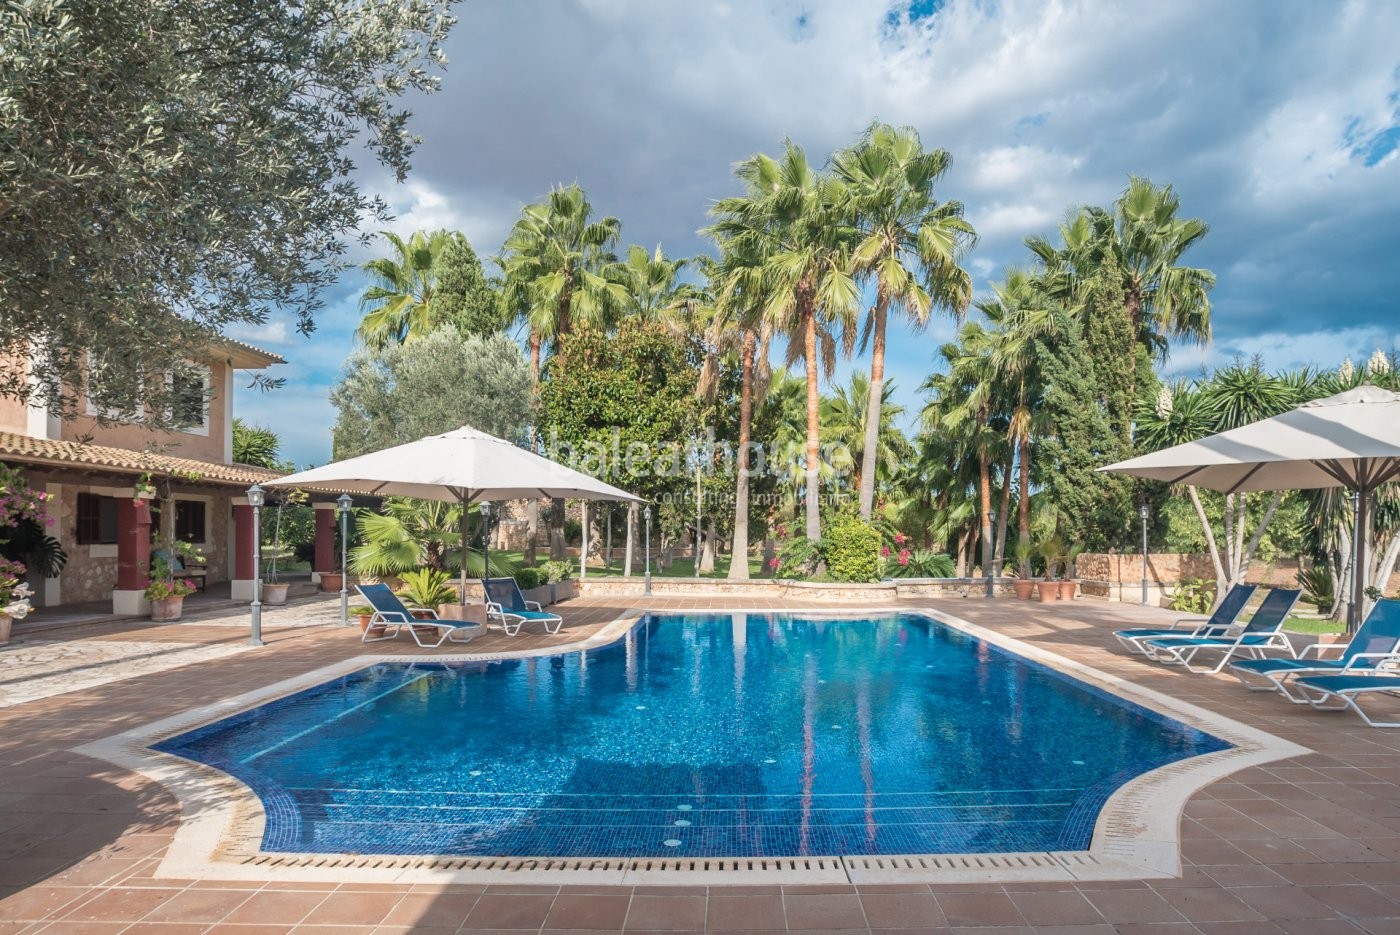 Large Mallorcan house with impressive garden and views over the rustic and beautiful countryside.